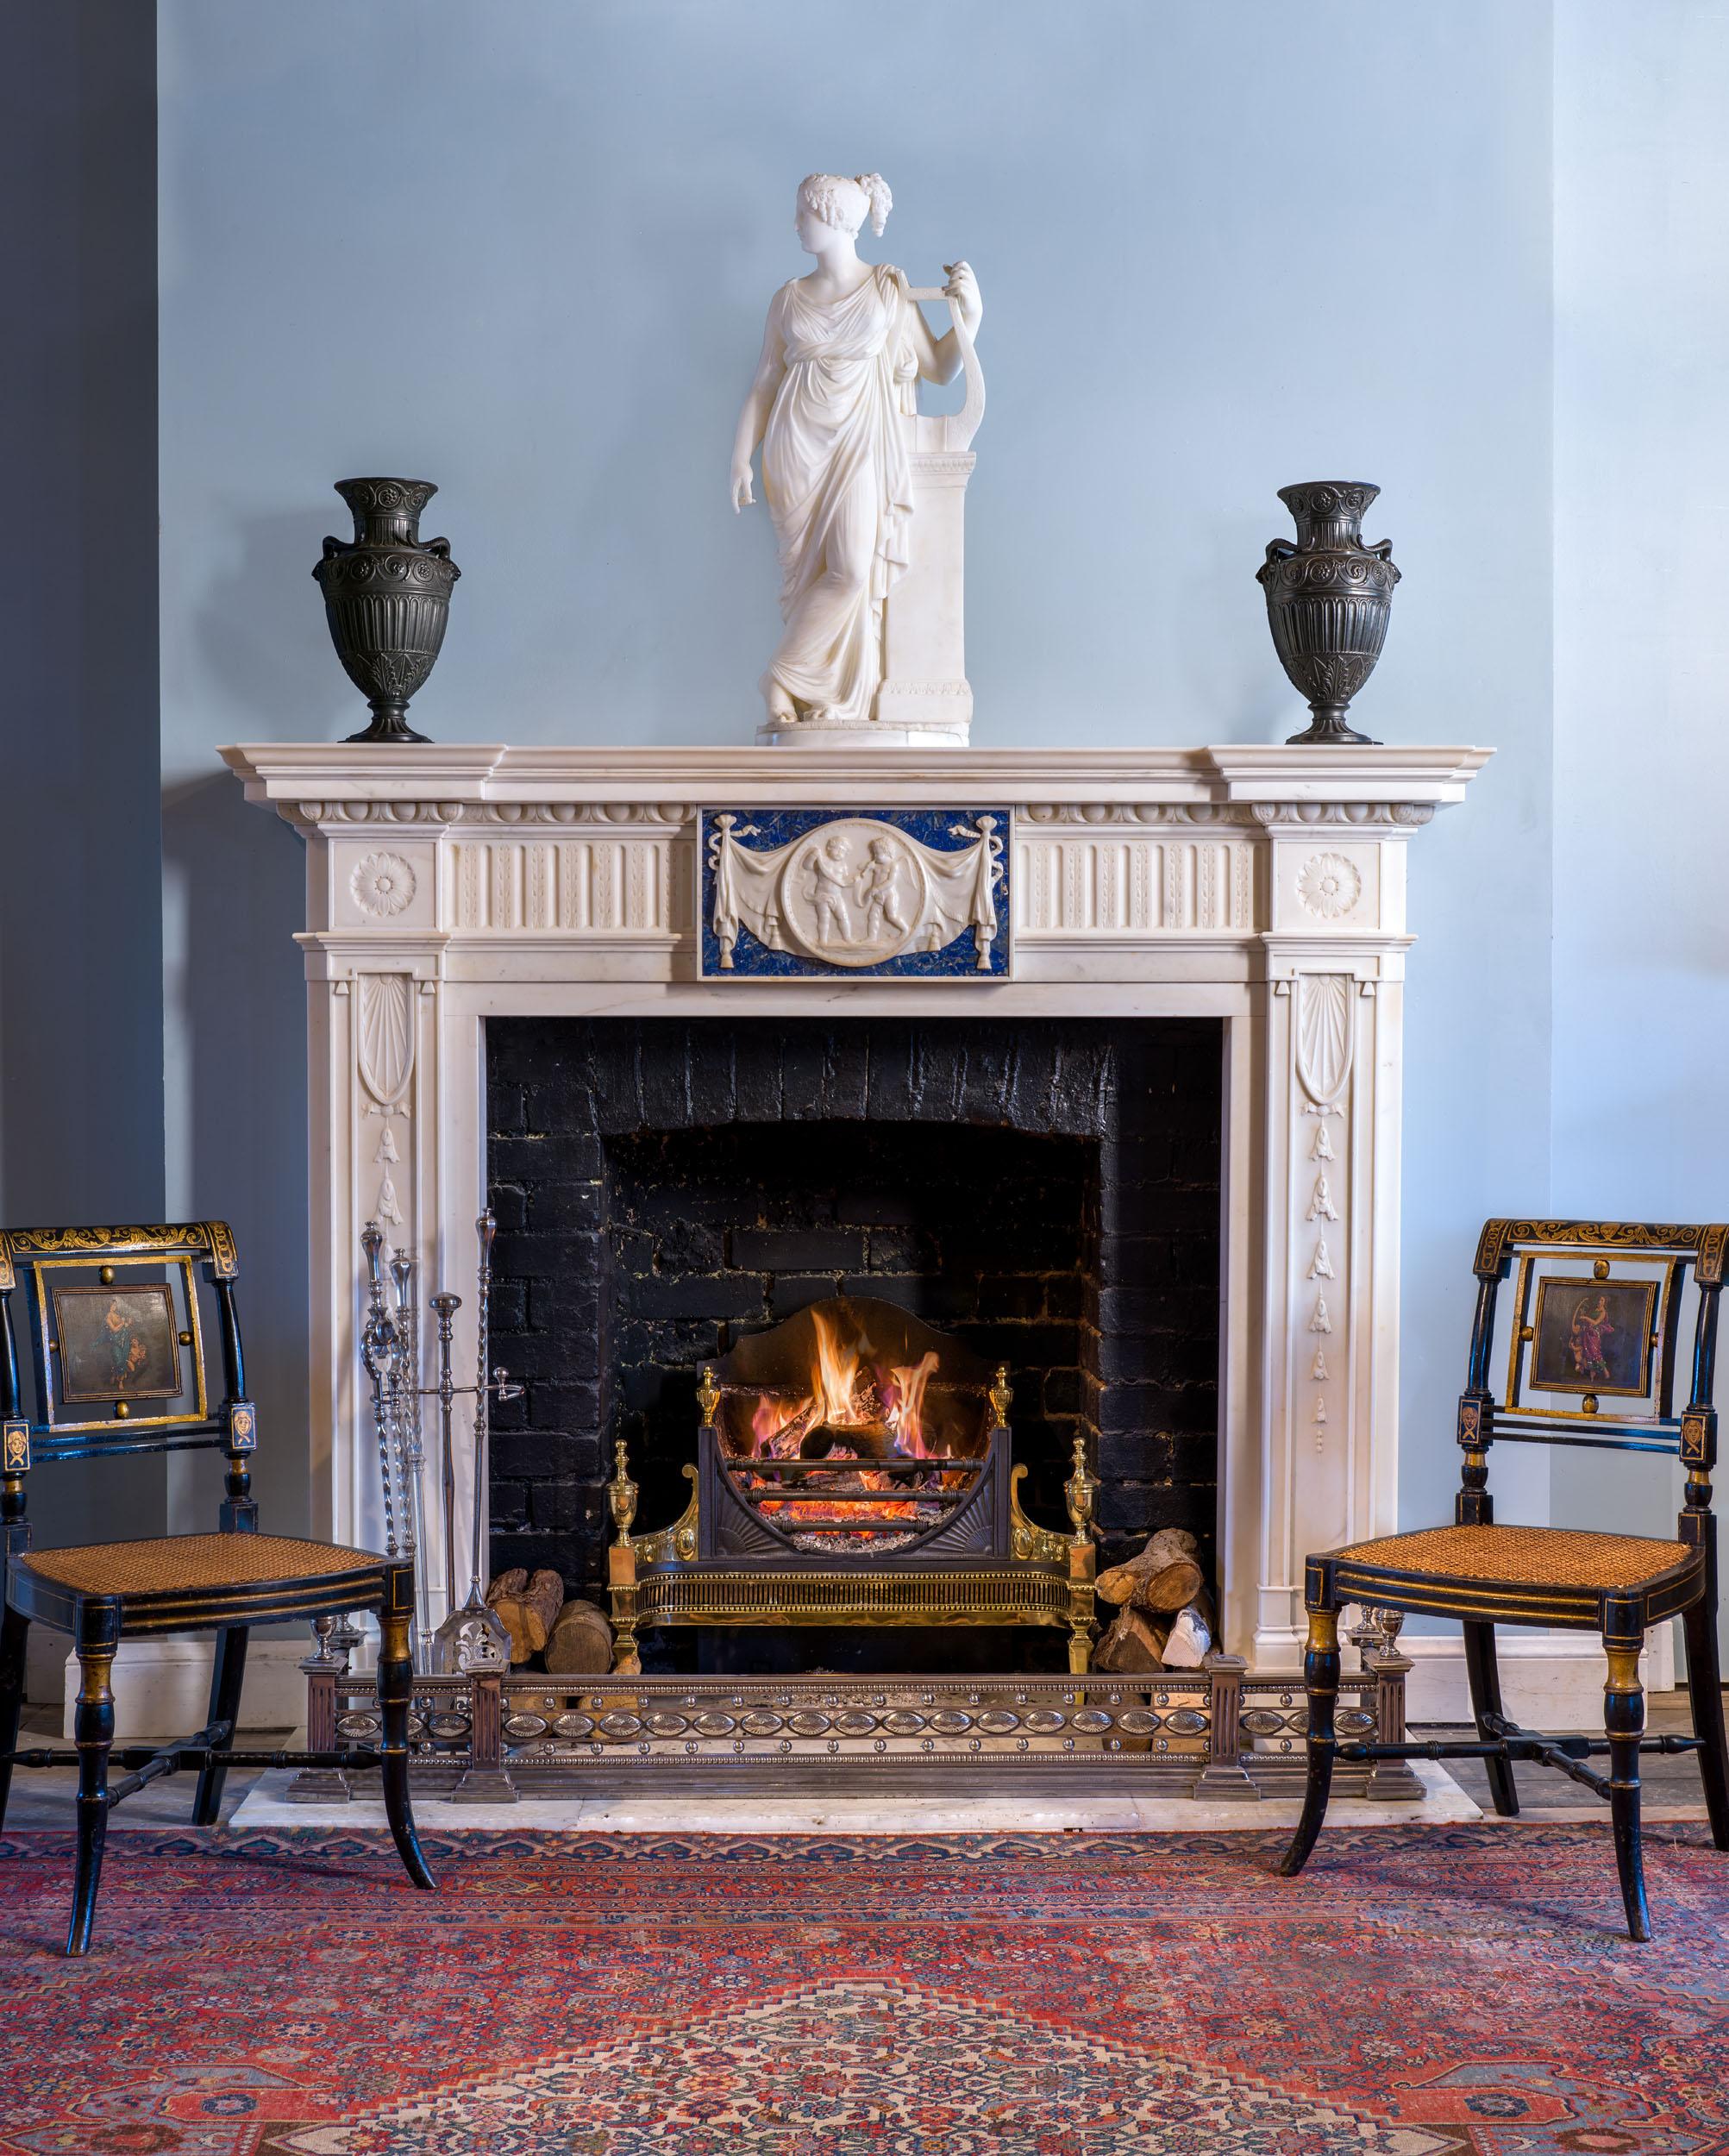 A rare neoclassical chimneypiece of exceptional quality in statuary marble with a lapis lazuli tablet. The inverse breakfront shelf is supported by a boldly carved egg and dart undershelf which rests on a crisply carved, reeded frieze. The frieze is